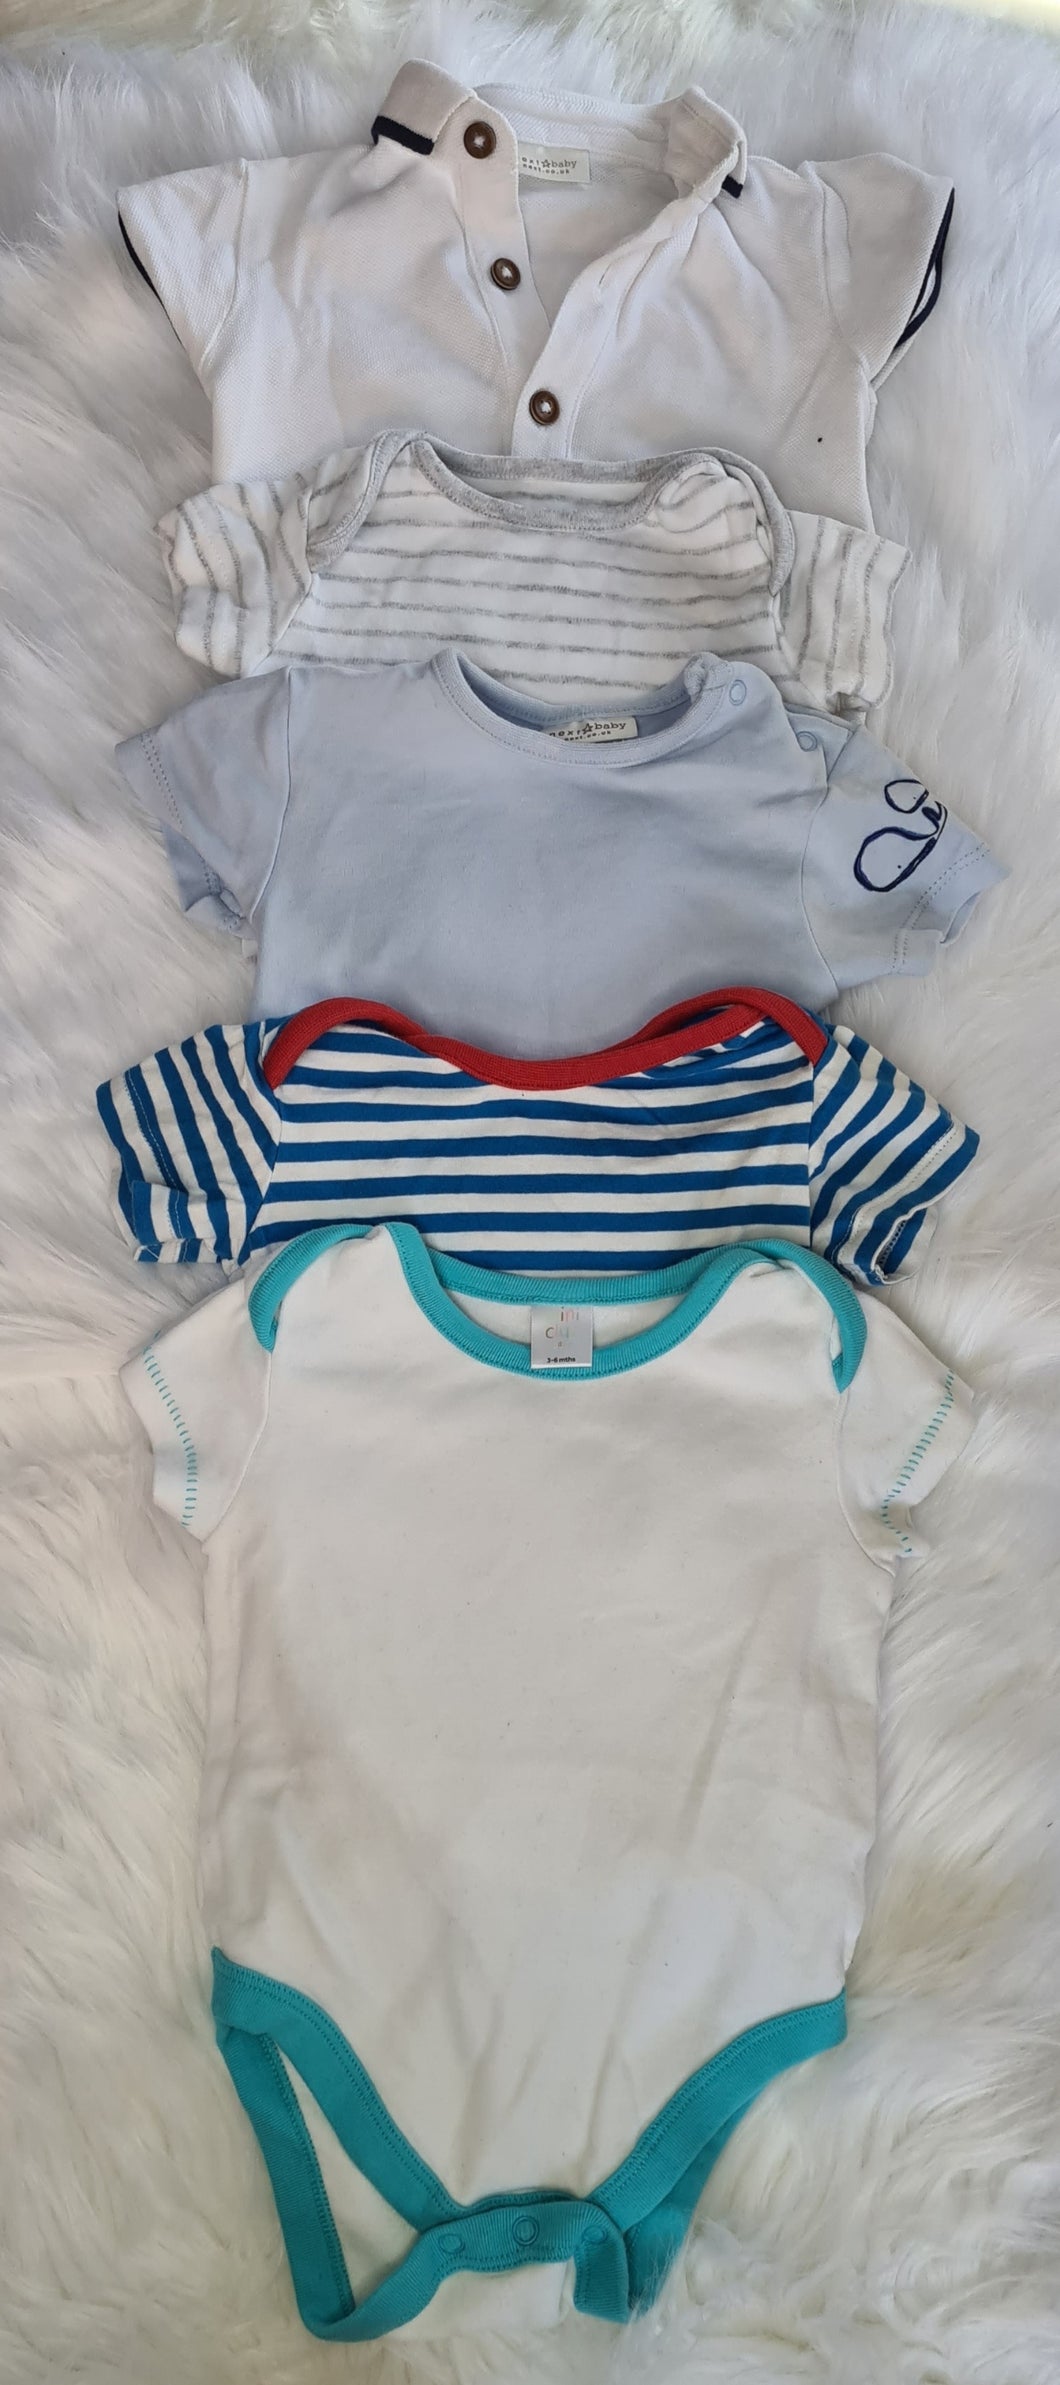 Boys 3-6 Months - Set of 5 Vets - Mixed